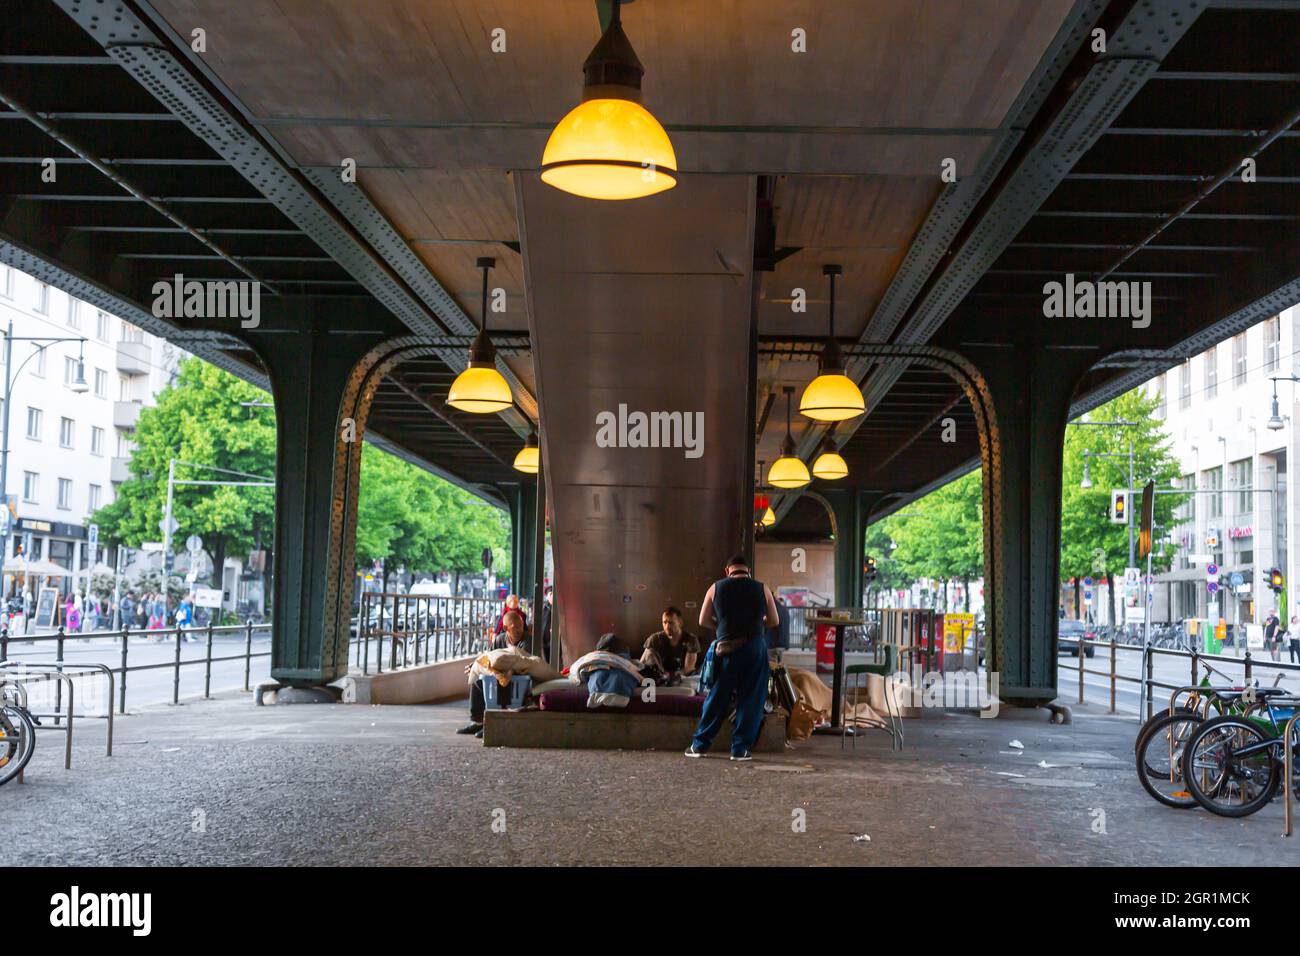 View of the space under the bridge in the city. Berlin, Germany - 05.17.2019 Stock Photo